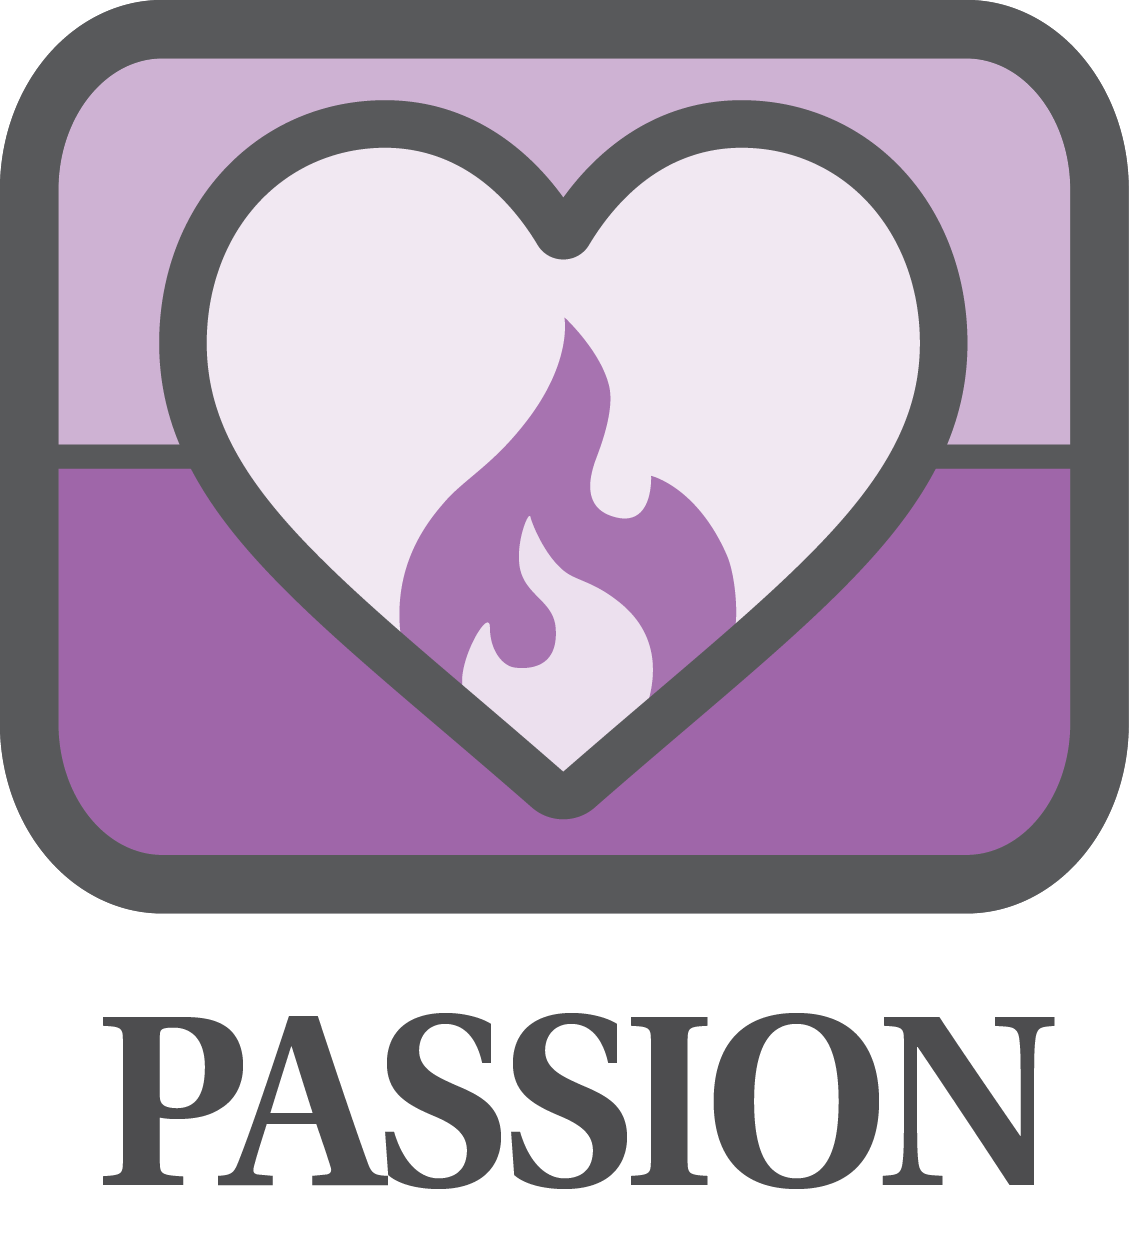 Icon of a heart and flame representing "passion".